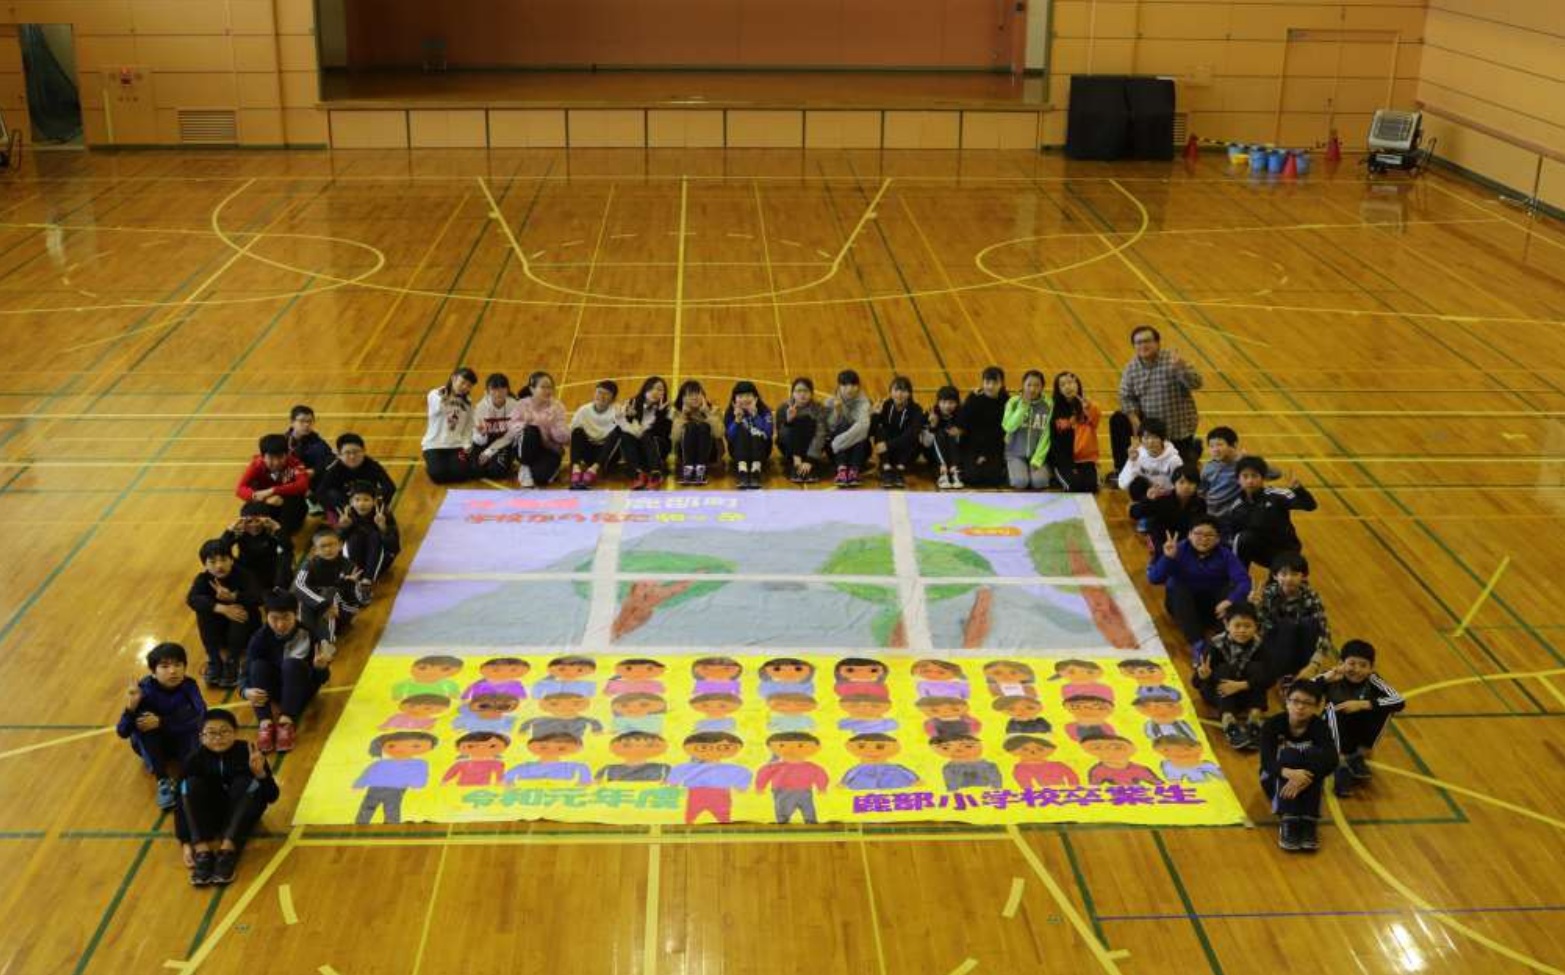 The Biggest Painting in the World 2020 Shikabe town was completed